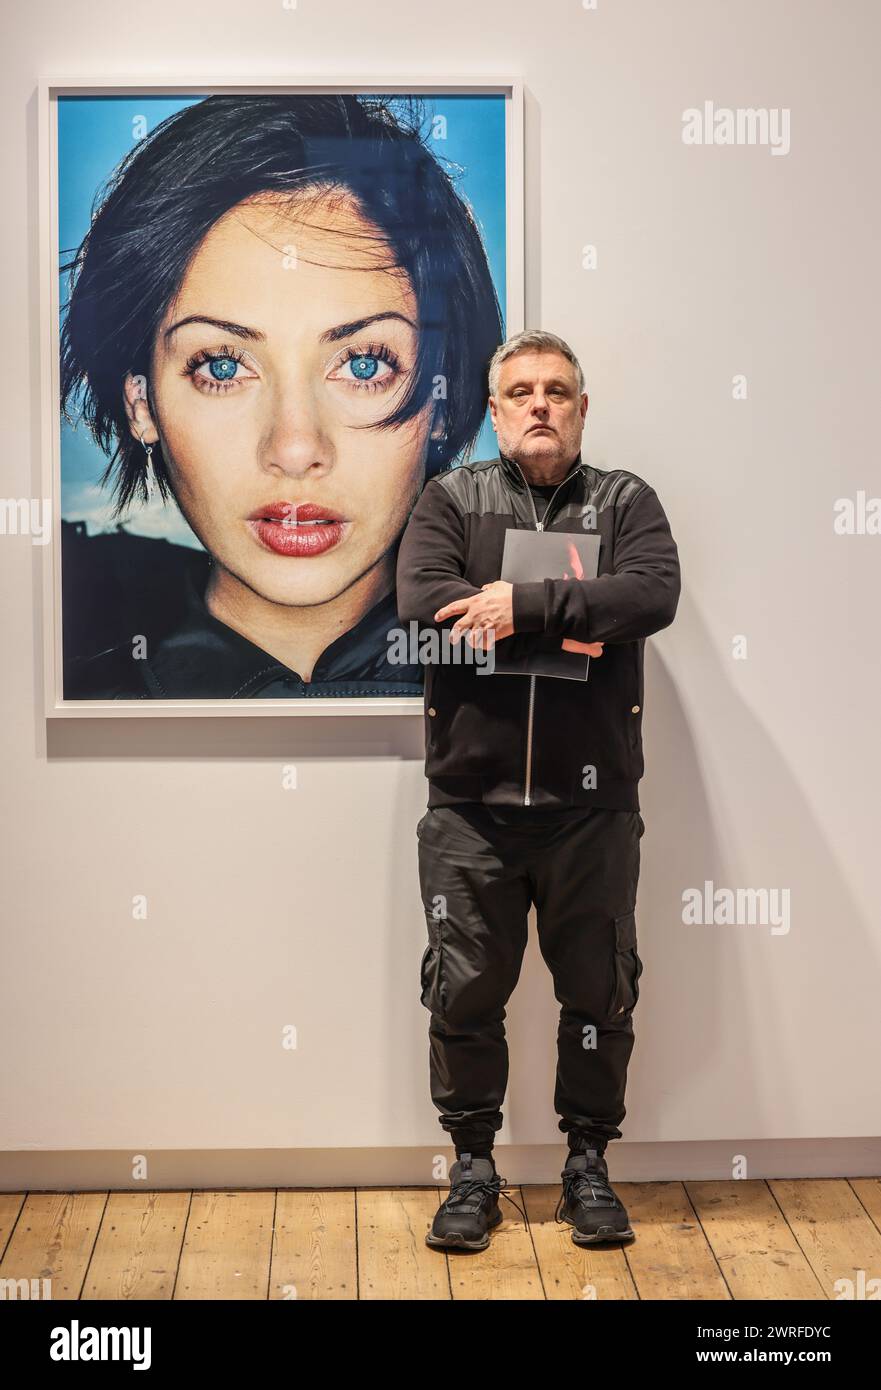 Cromwell Place, London, UK. 12th Mar, 2024. Rankin (pictured) Next to Natalie Imbruglia Left of the Middle Album Artwork, 1997 C-type LambdaThrough a carefully curated selection of portraits, the latest TIN MAN ART exhibition, Sound Off - at Cromwell Place from 12-24 March 2024 - showcases Rankin ́s ability to create images that came to define the zeitgeist, as well exploring the personalities behind each musician's persona.Paul Quezada-Neiman/Alamy Live News Credit: Paul Quezada-Neiman/Alamy Live News Stock Photo